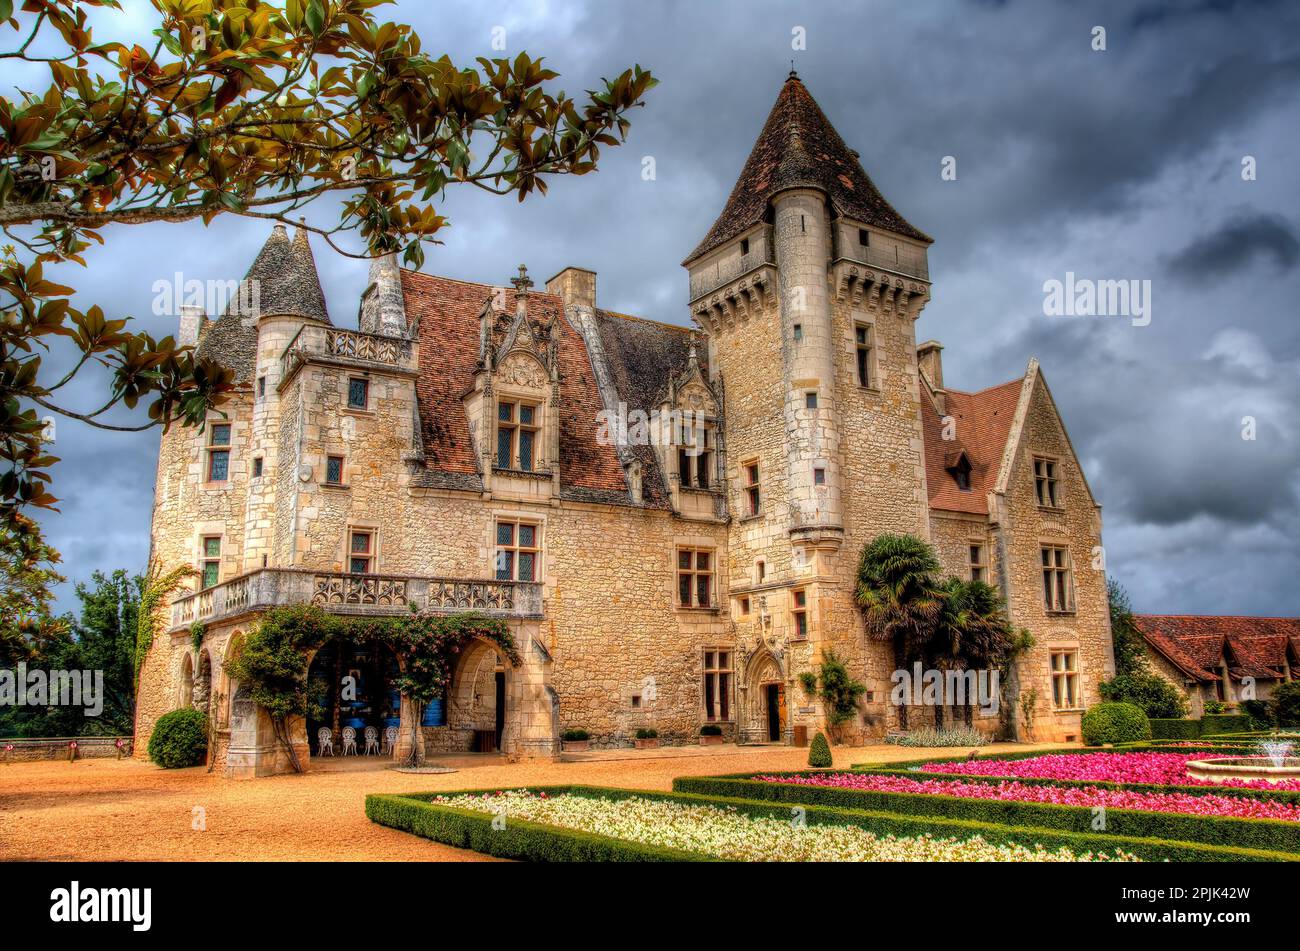 The Beautiful Castle of Milandes in Dordogne, France Stock Photo